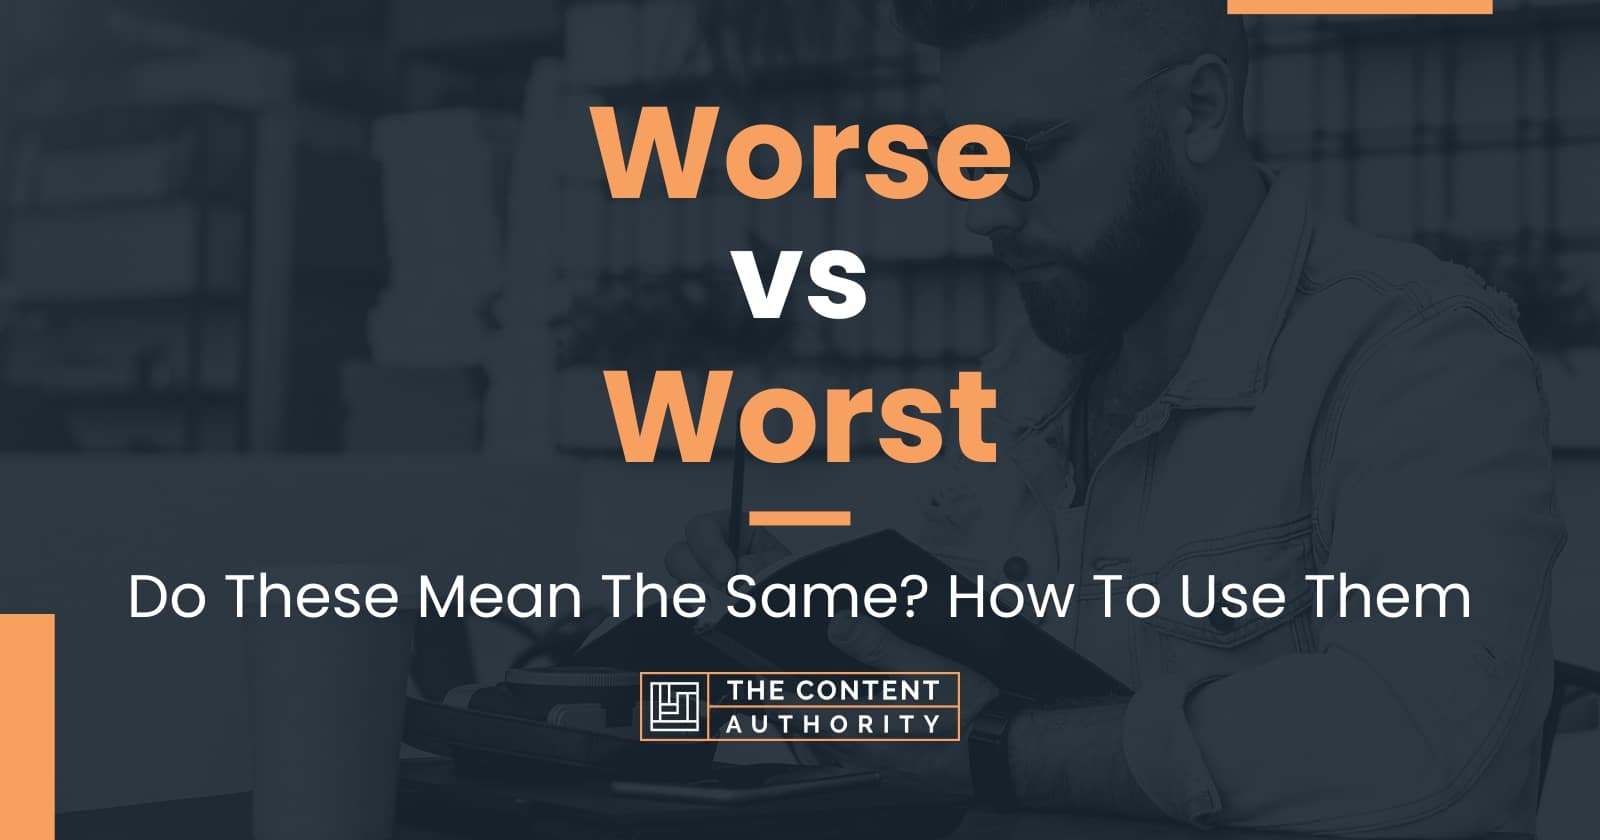 worse-vs-worst-do-these-mean-the-same-how-to-use-them